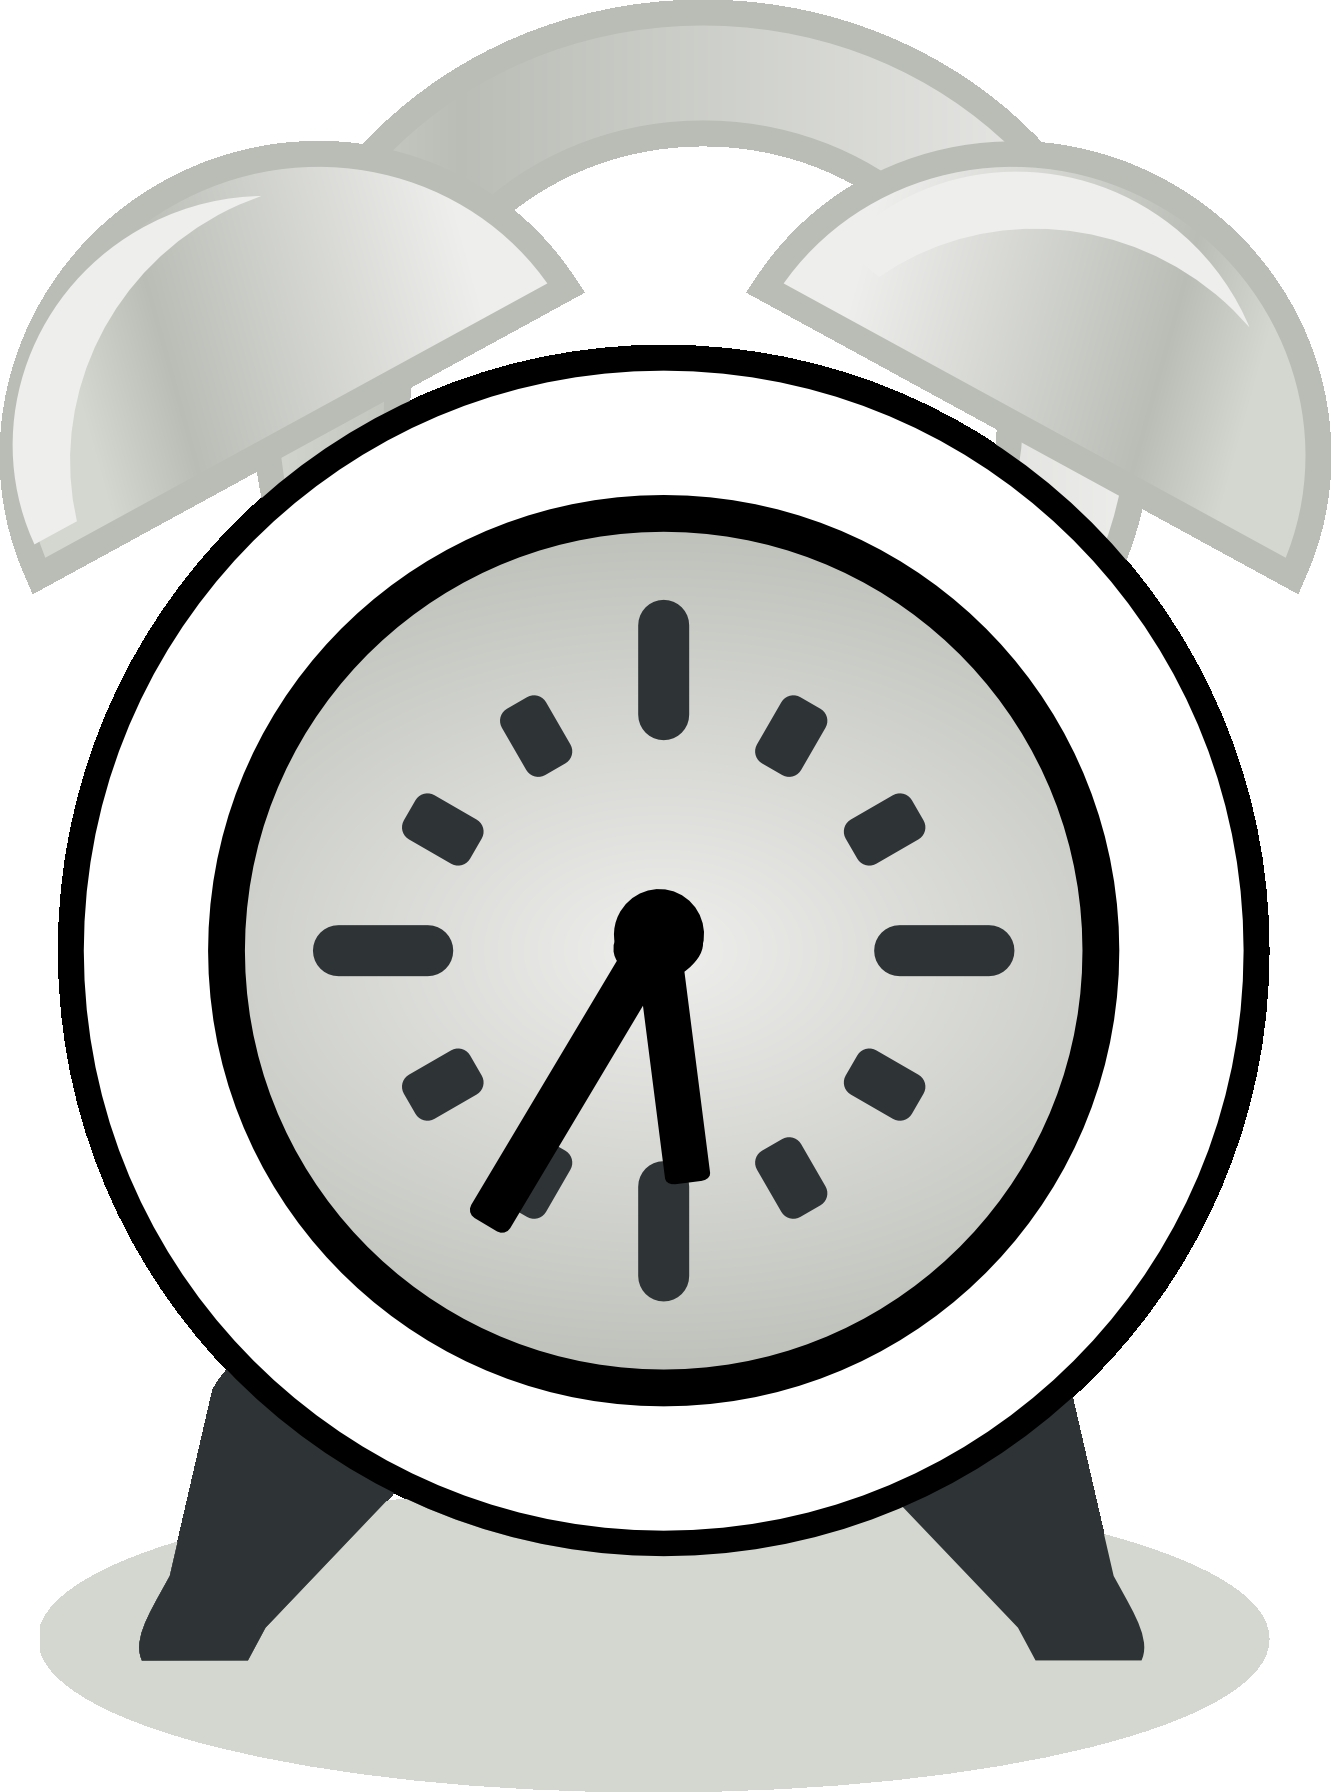 Home Office : Alarm Clock Clipart, Stock Vector And Royalty Free